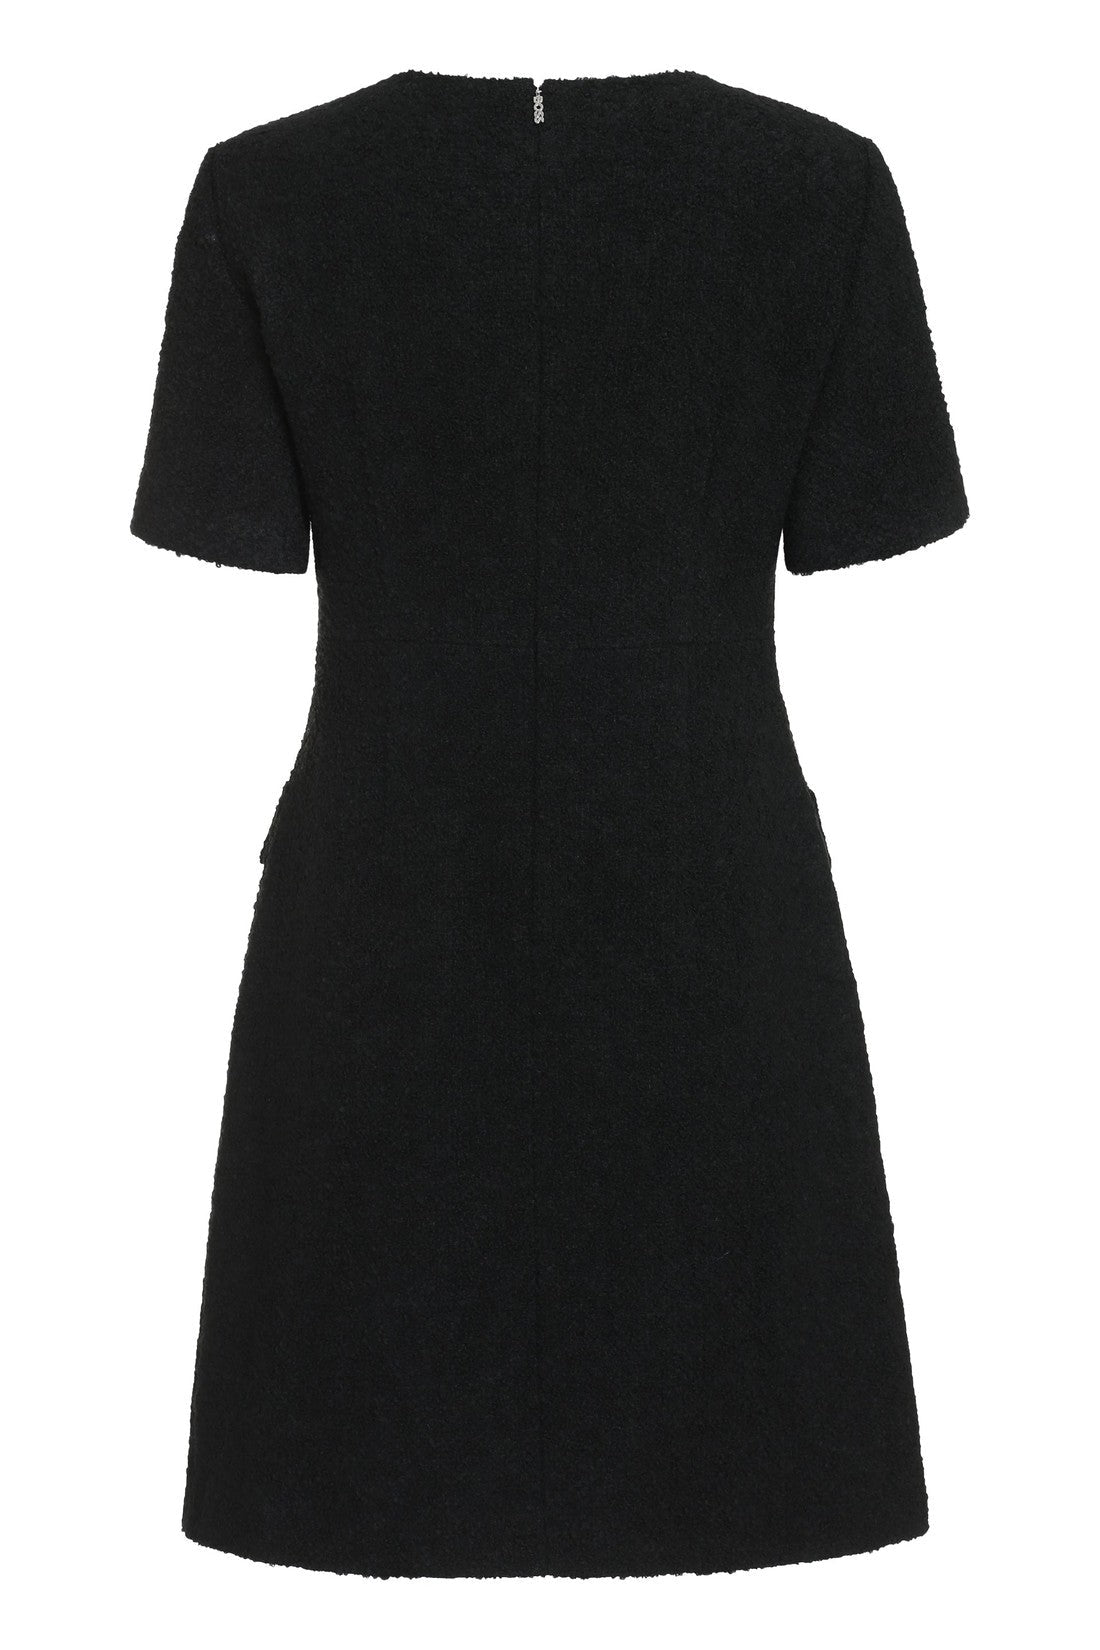 BOSS-OUTLET-SALE-Docanah knitted dress-ARCHIVIST